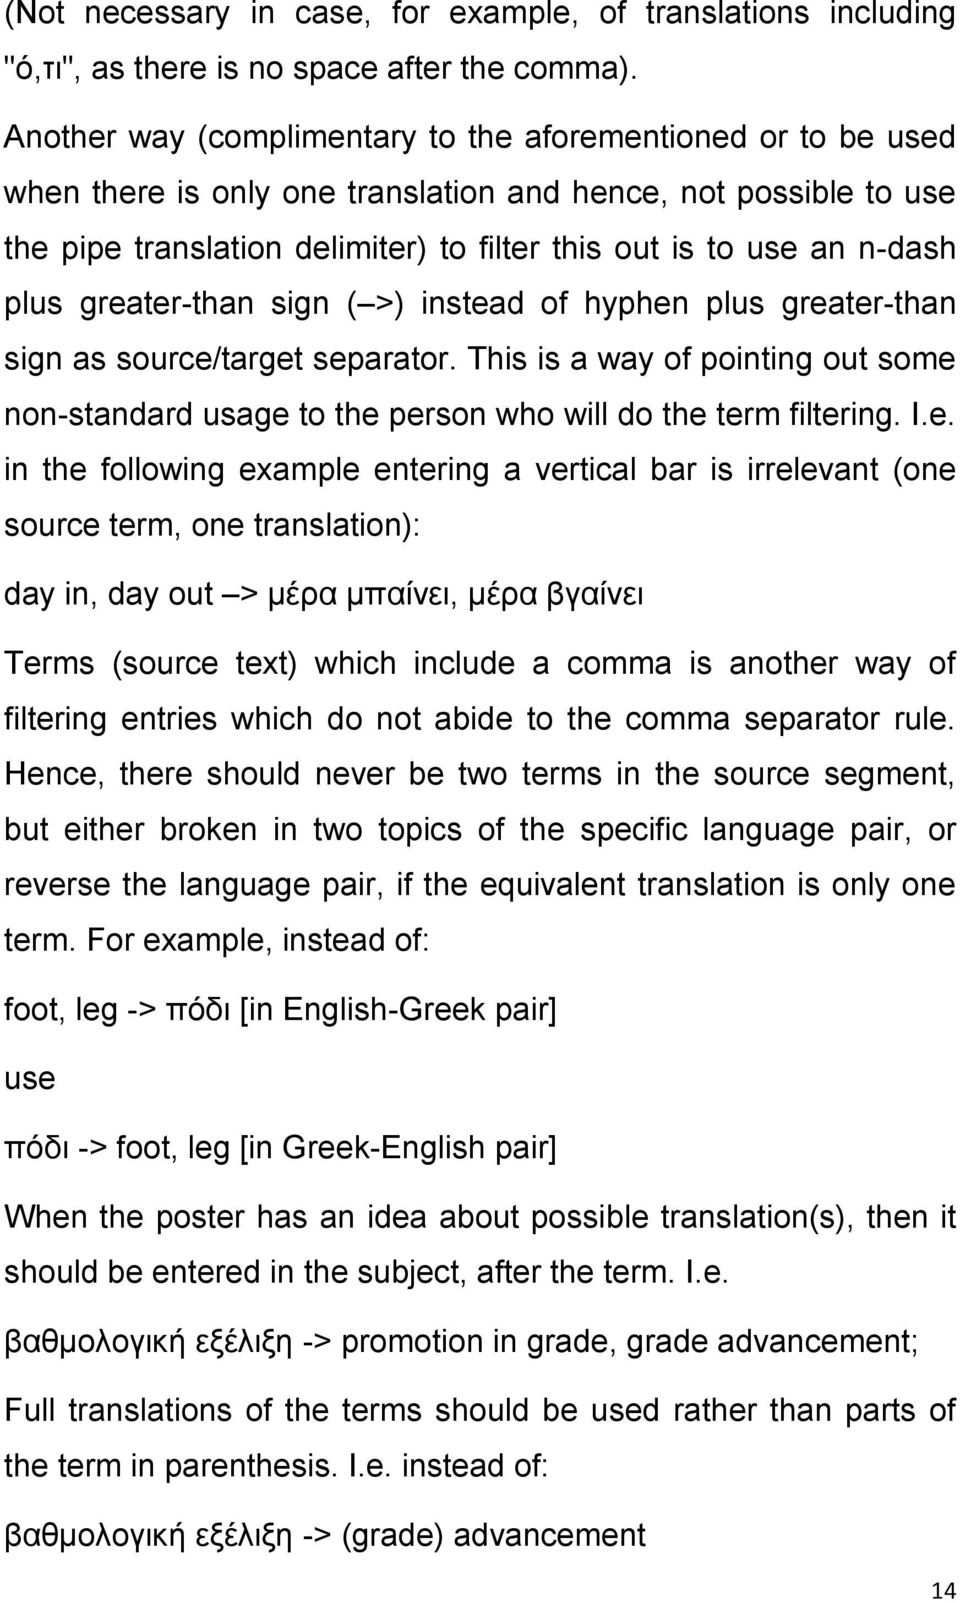 plus greater-than sign ( >) instead of hyphen plus greater-than sign as source/target separator. This is a way of pointing out some non-standard usage to the person who will do the term filtering. I.